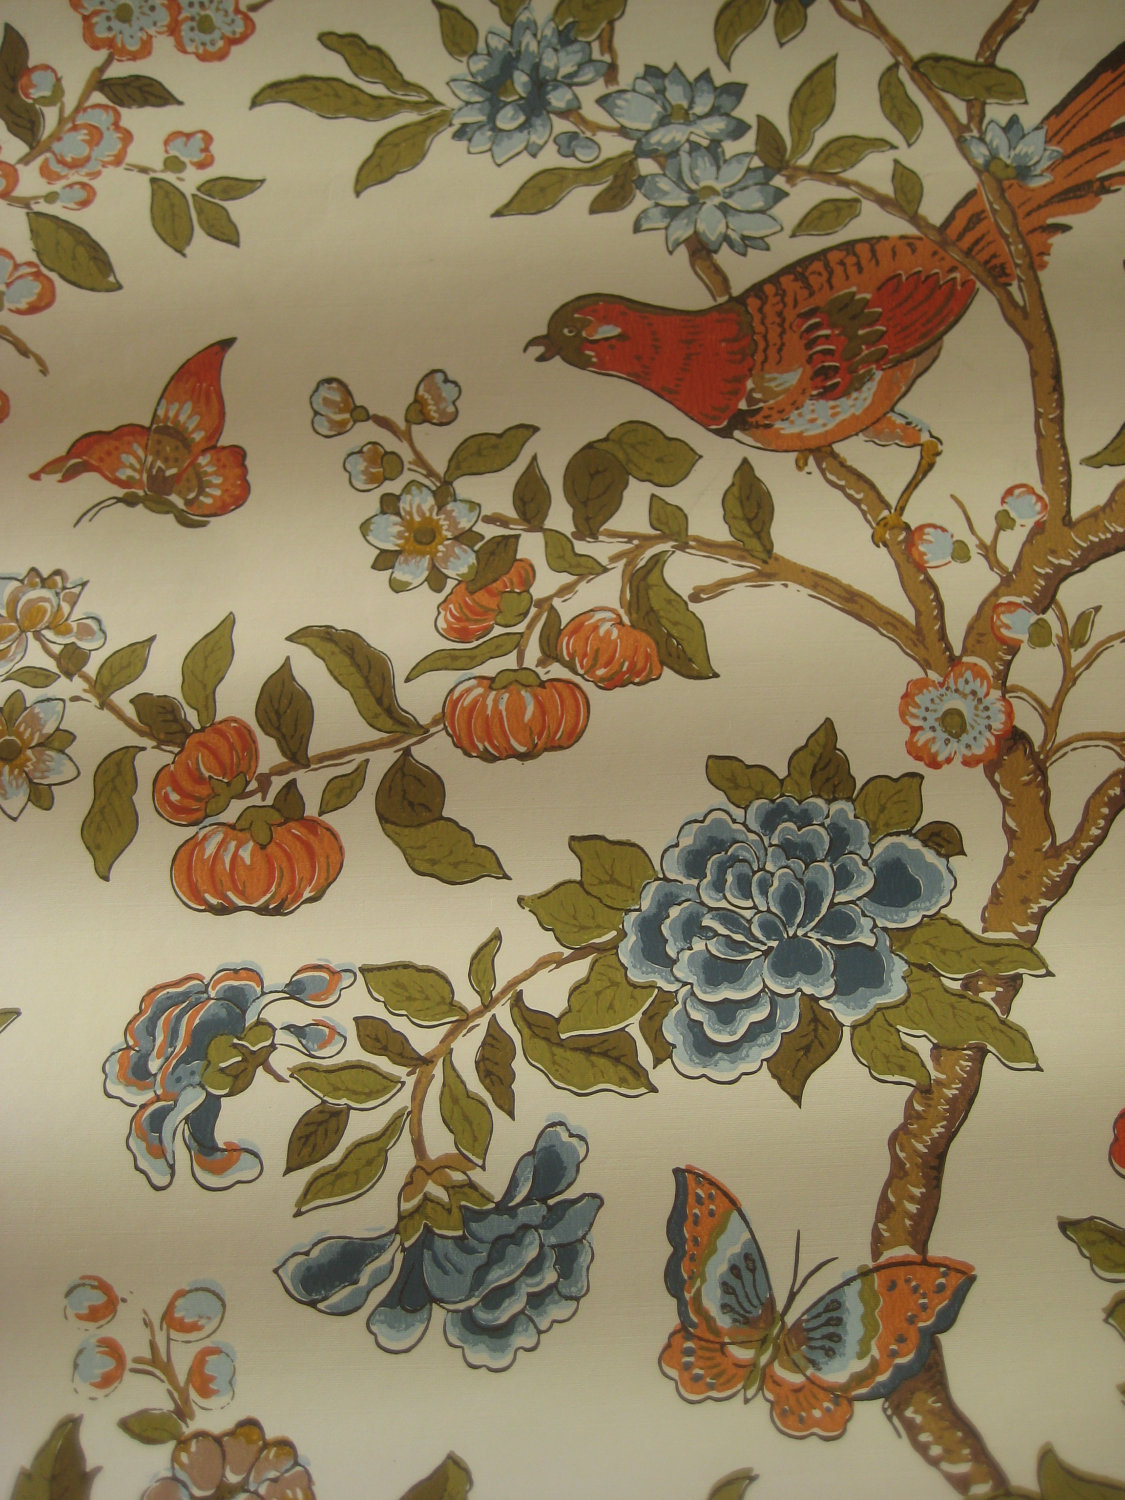 Vintage Wallpaper Birds Butterflies and Flowers Orange and Blues